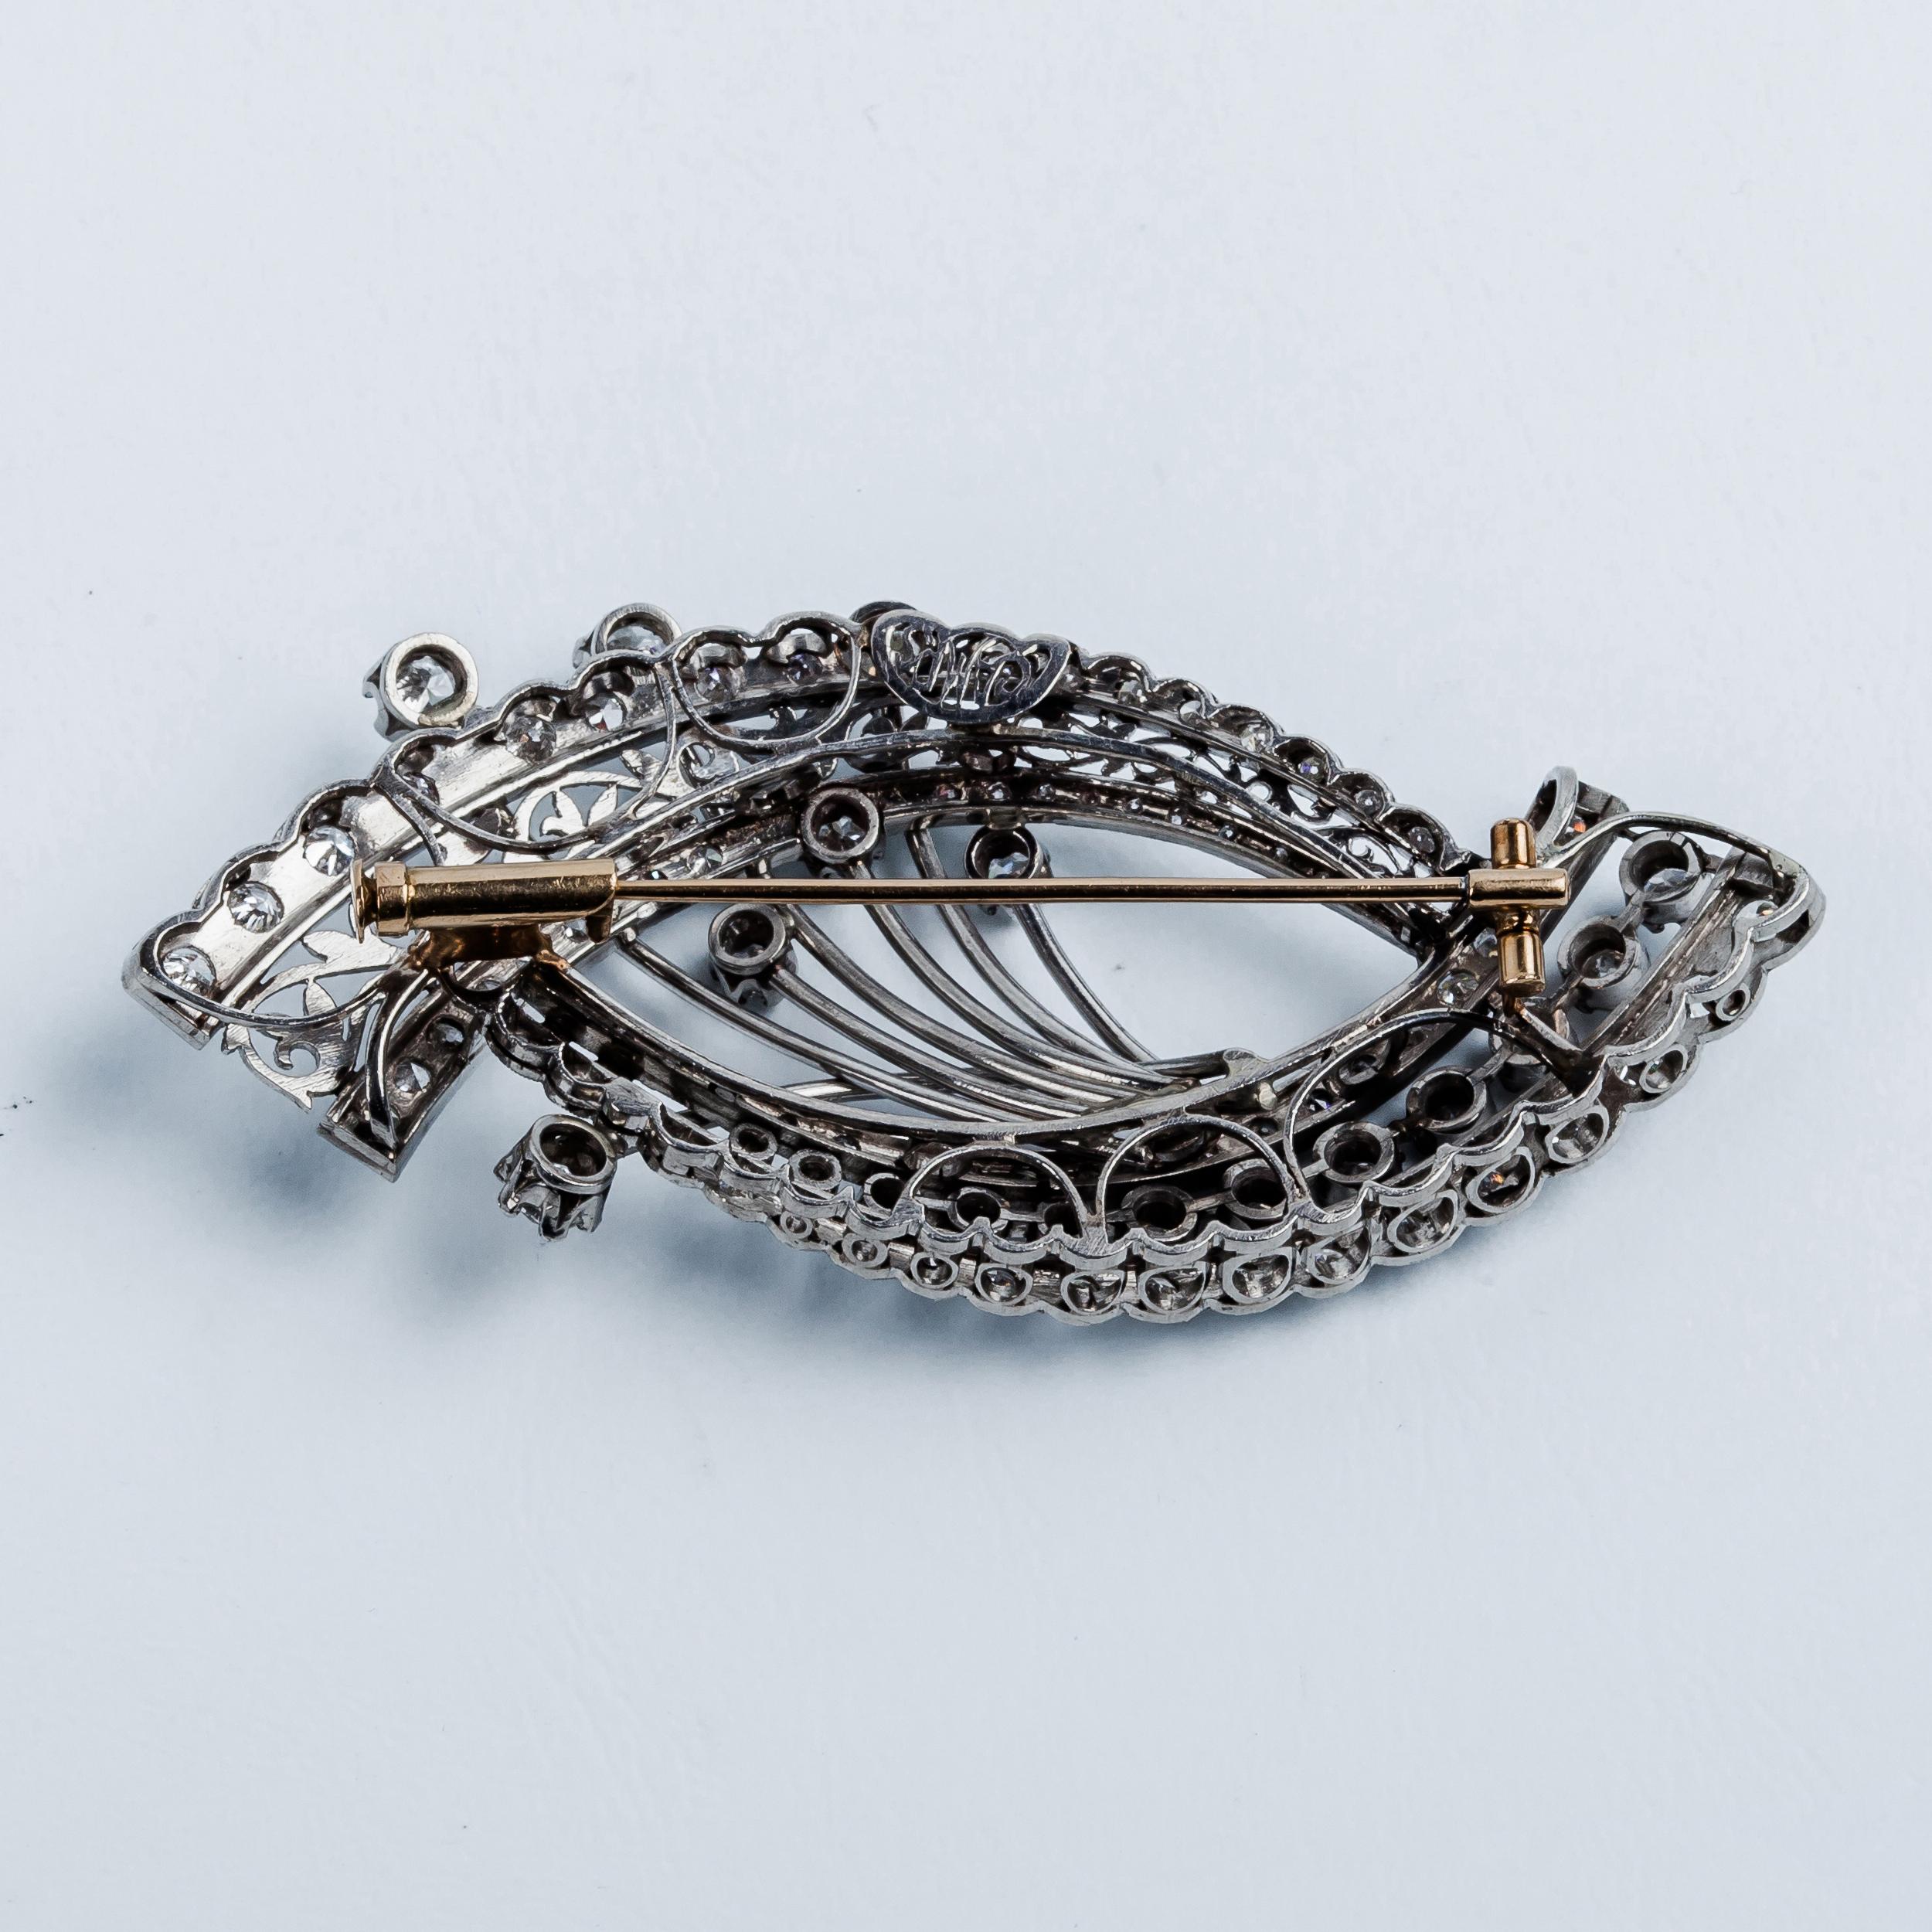 Designer CAMPS vintage brooch in platinum and clean white diamonds 
Slimline design of two opposing curves made of  diamond bands and twigs with claw setting and openwork plant motifs in matt finishing.

MATERIAL
◘ Yellow Gold Pin
◘ Size 70mm / 2,75